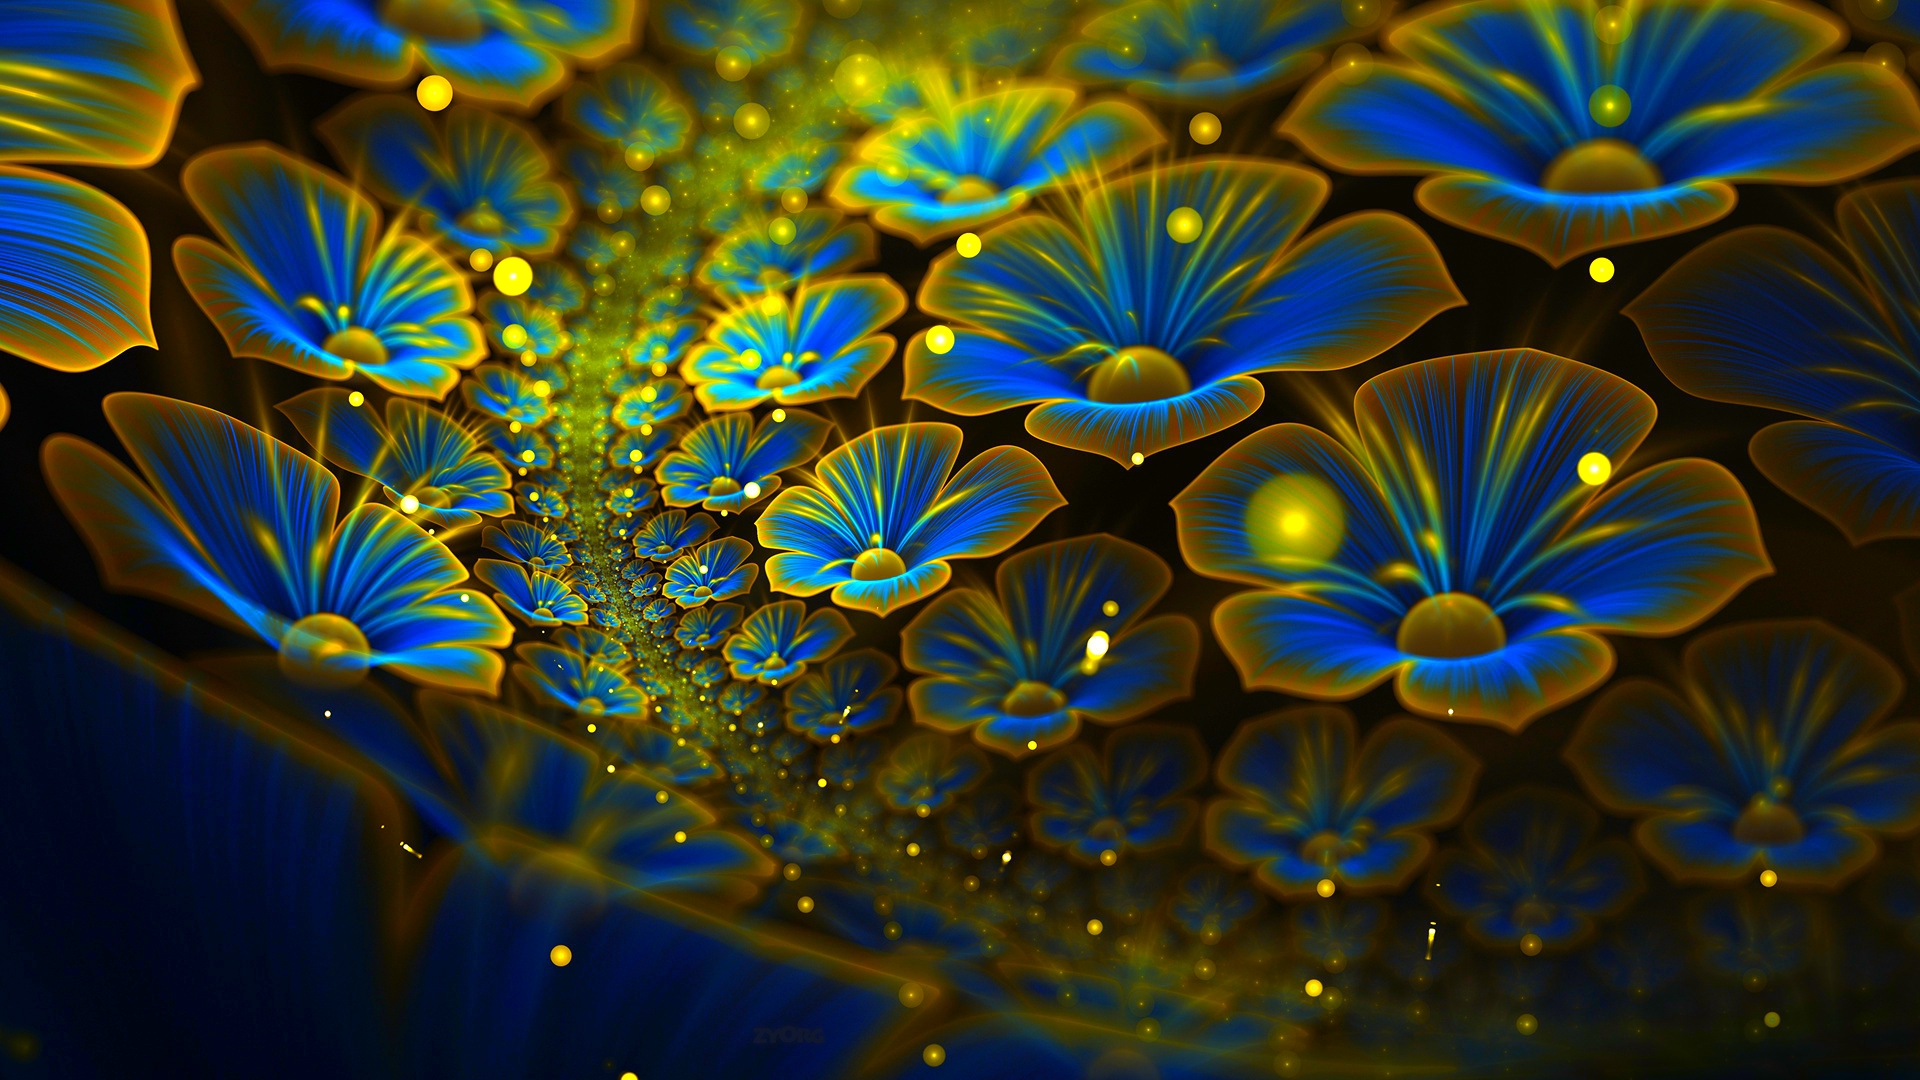 Abstract Anime Nature Wallpaper 1920 X 1080 14189 Hd Wallpapers